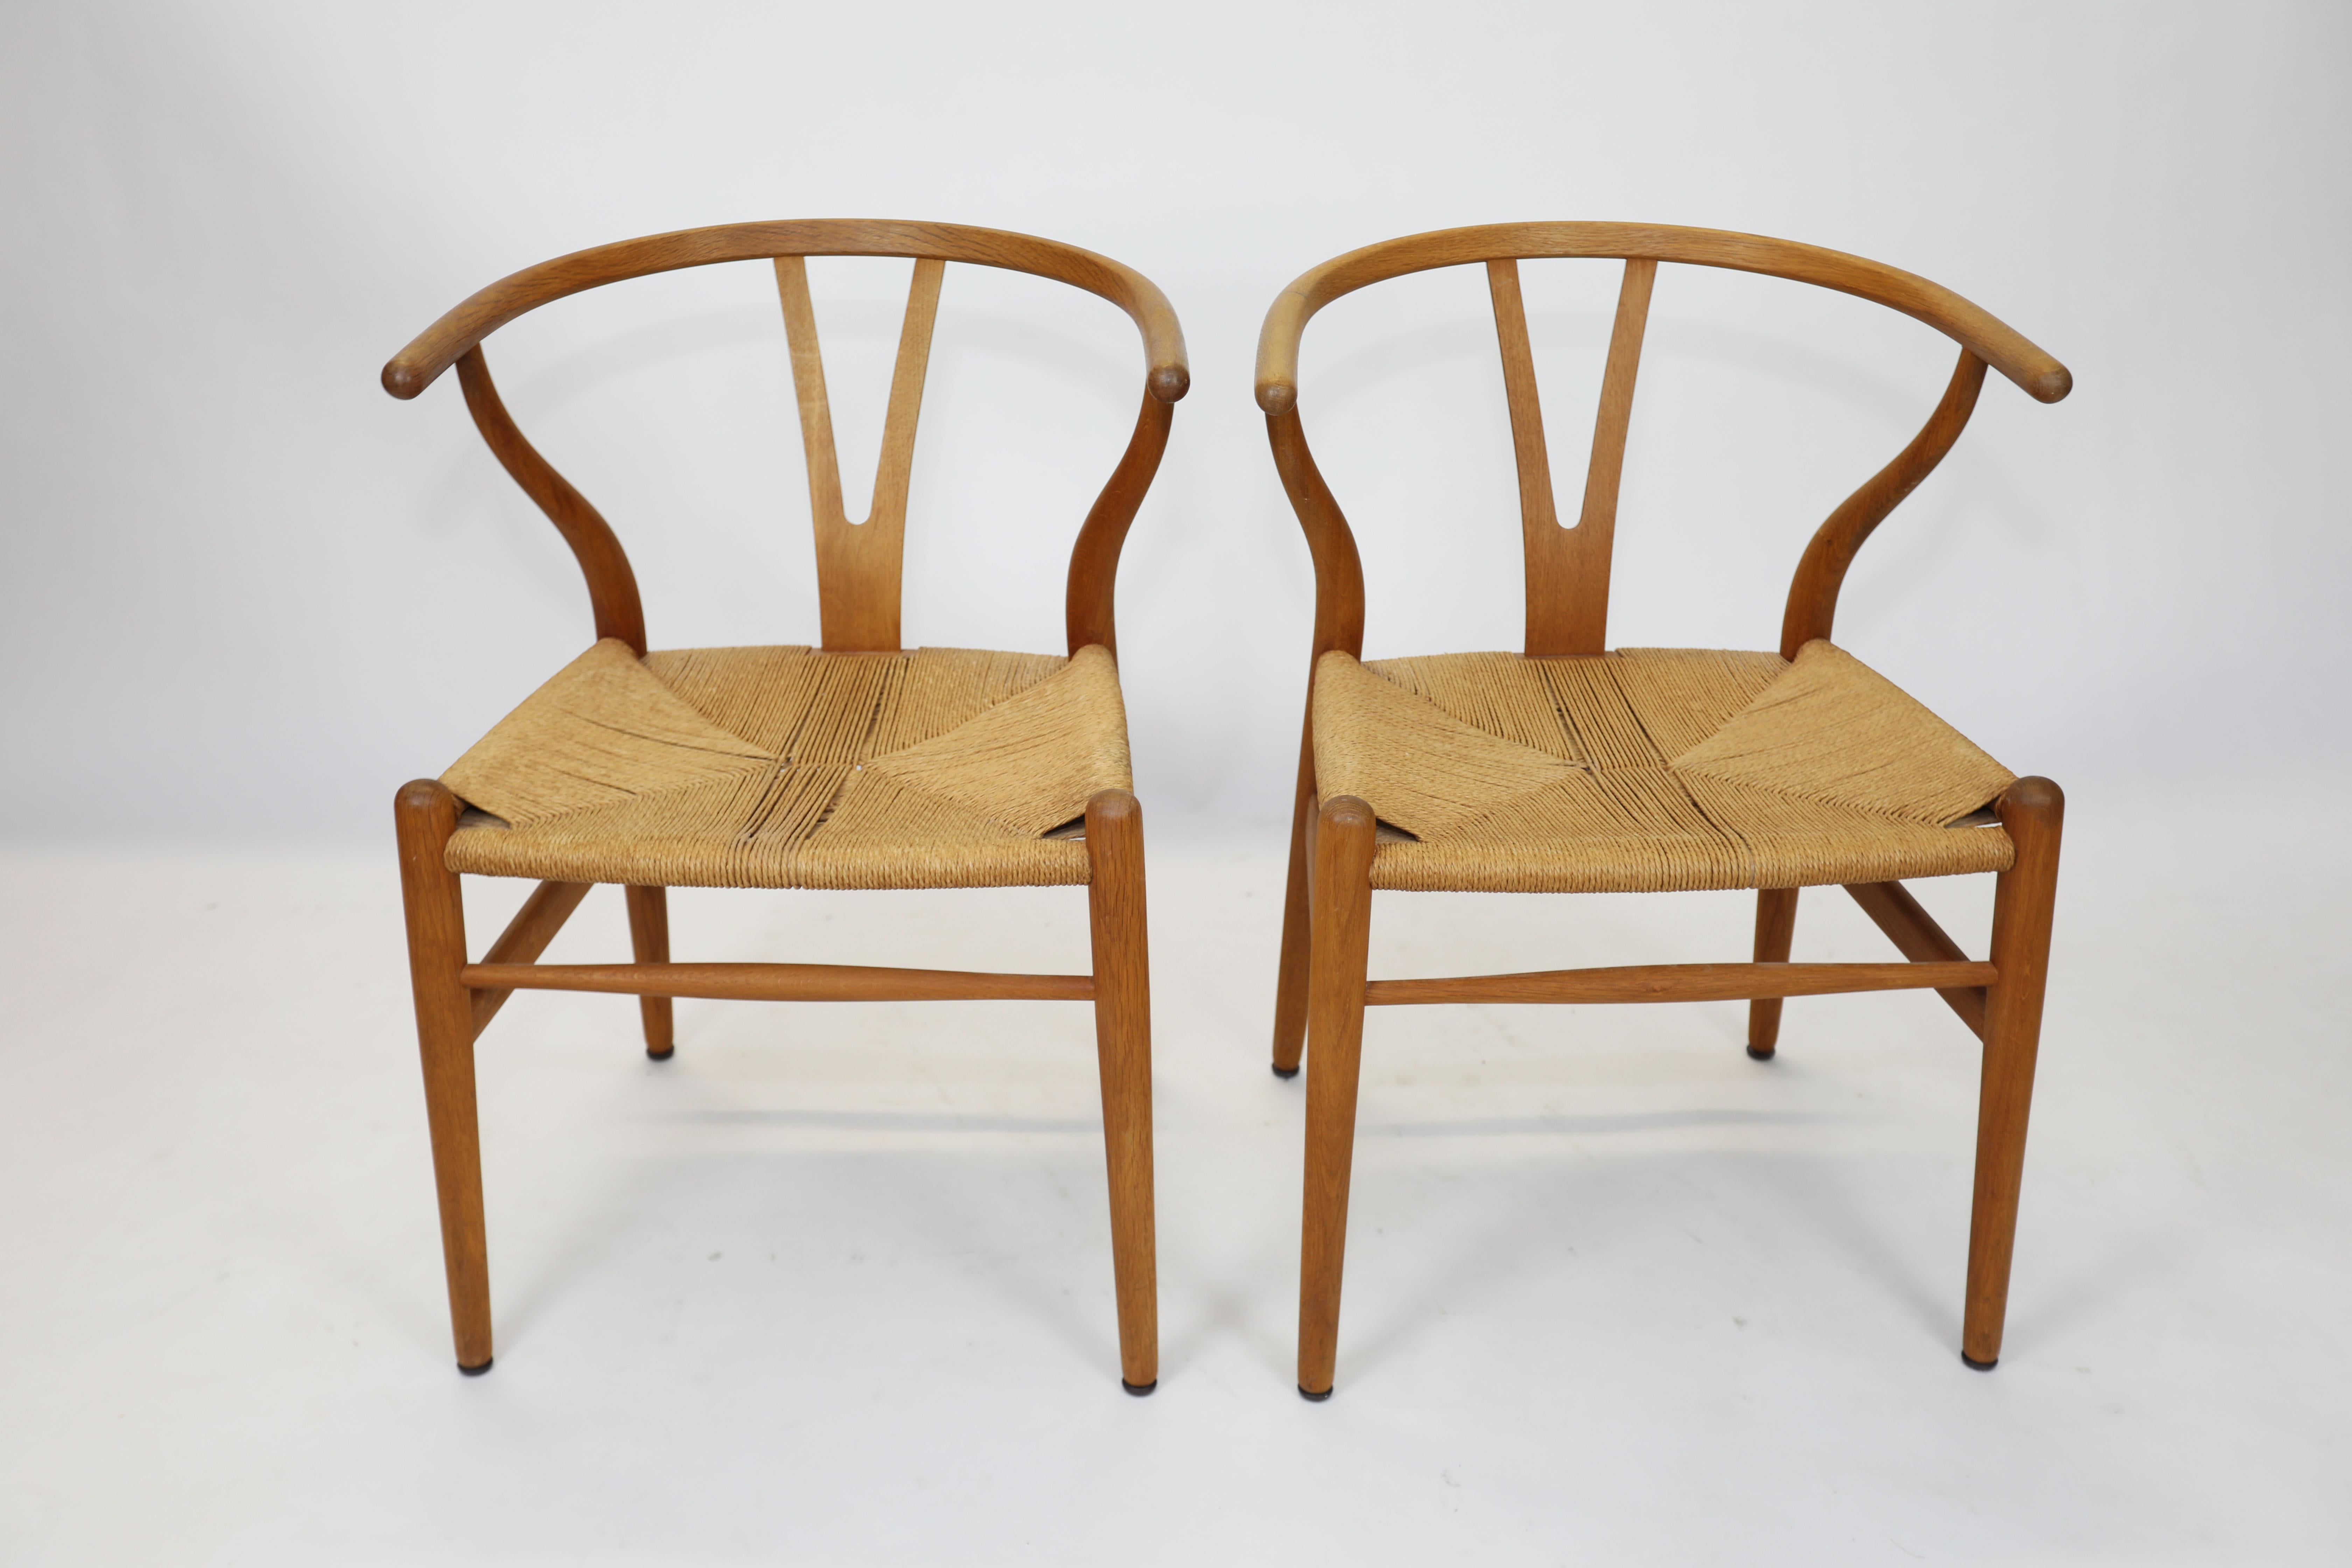 A nice set of 4 chairs, original Teak surface and Paper Chord Seats.
Carl Hansen Labels present.
A few minor breaks in seats.